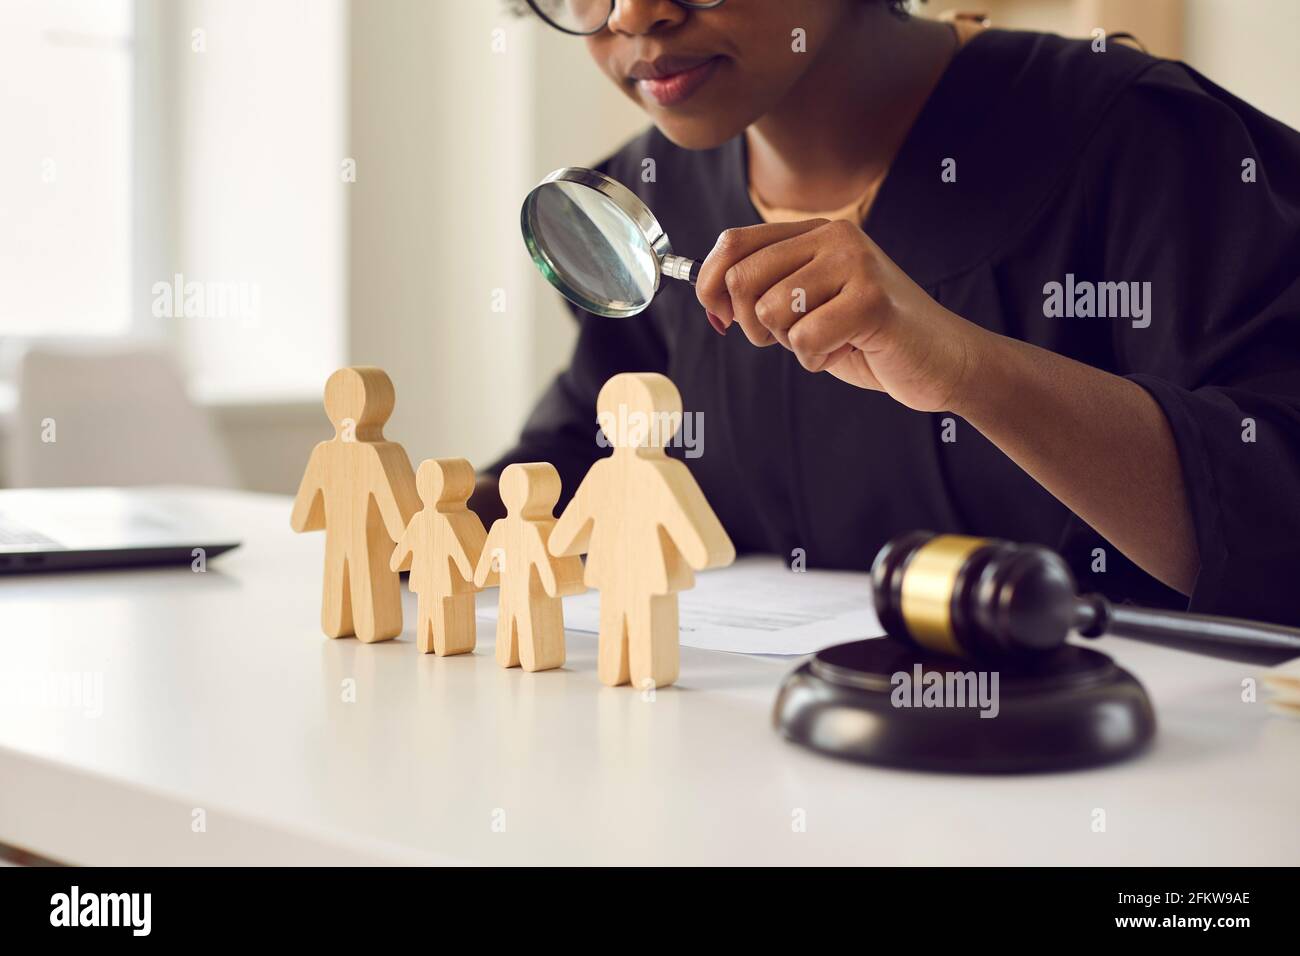 Judge with magnifying glass looking at little family figures standing on her table Stock Photo